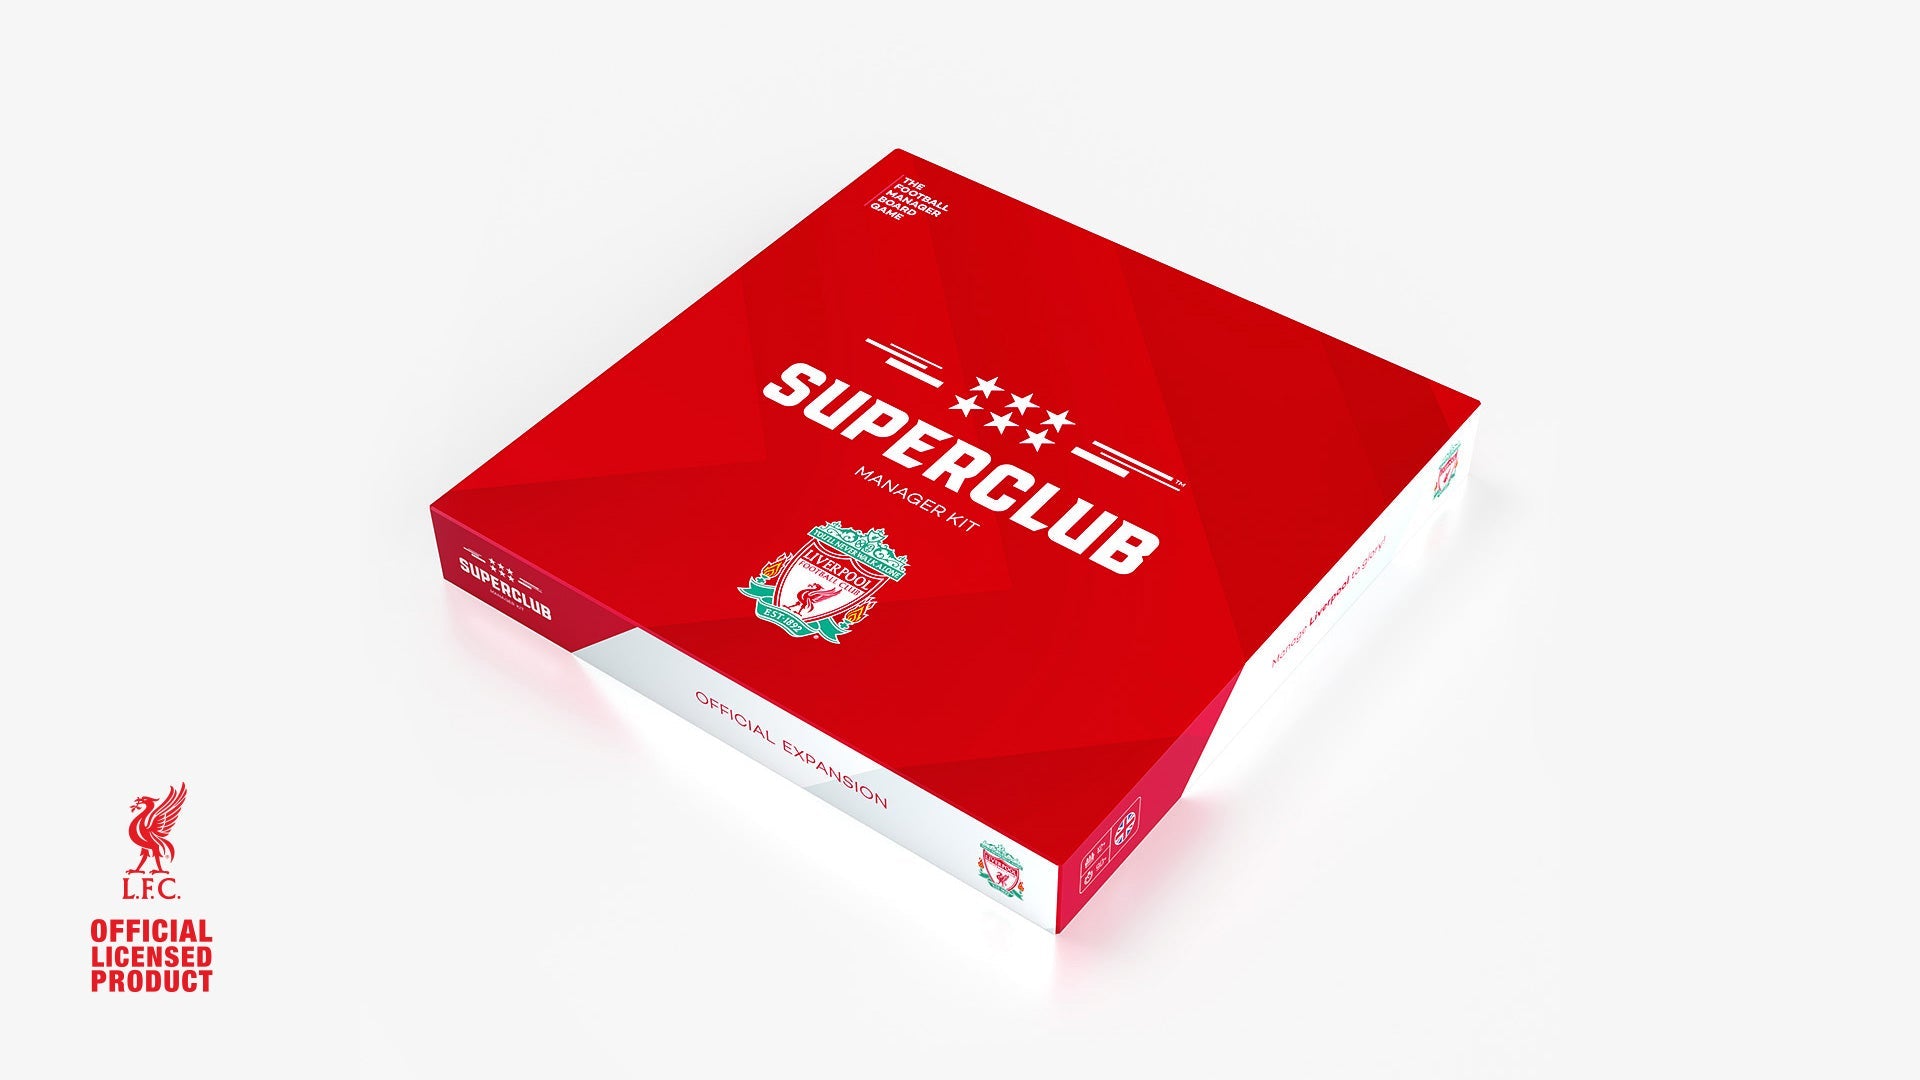 Liverpool Football Club joins the Superclub family!